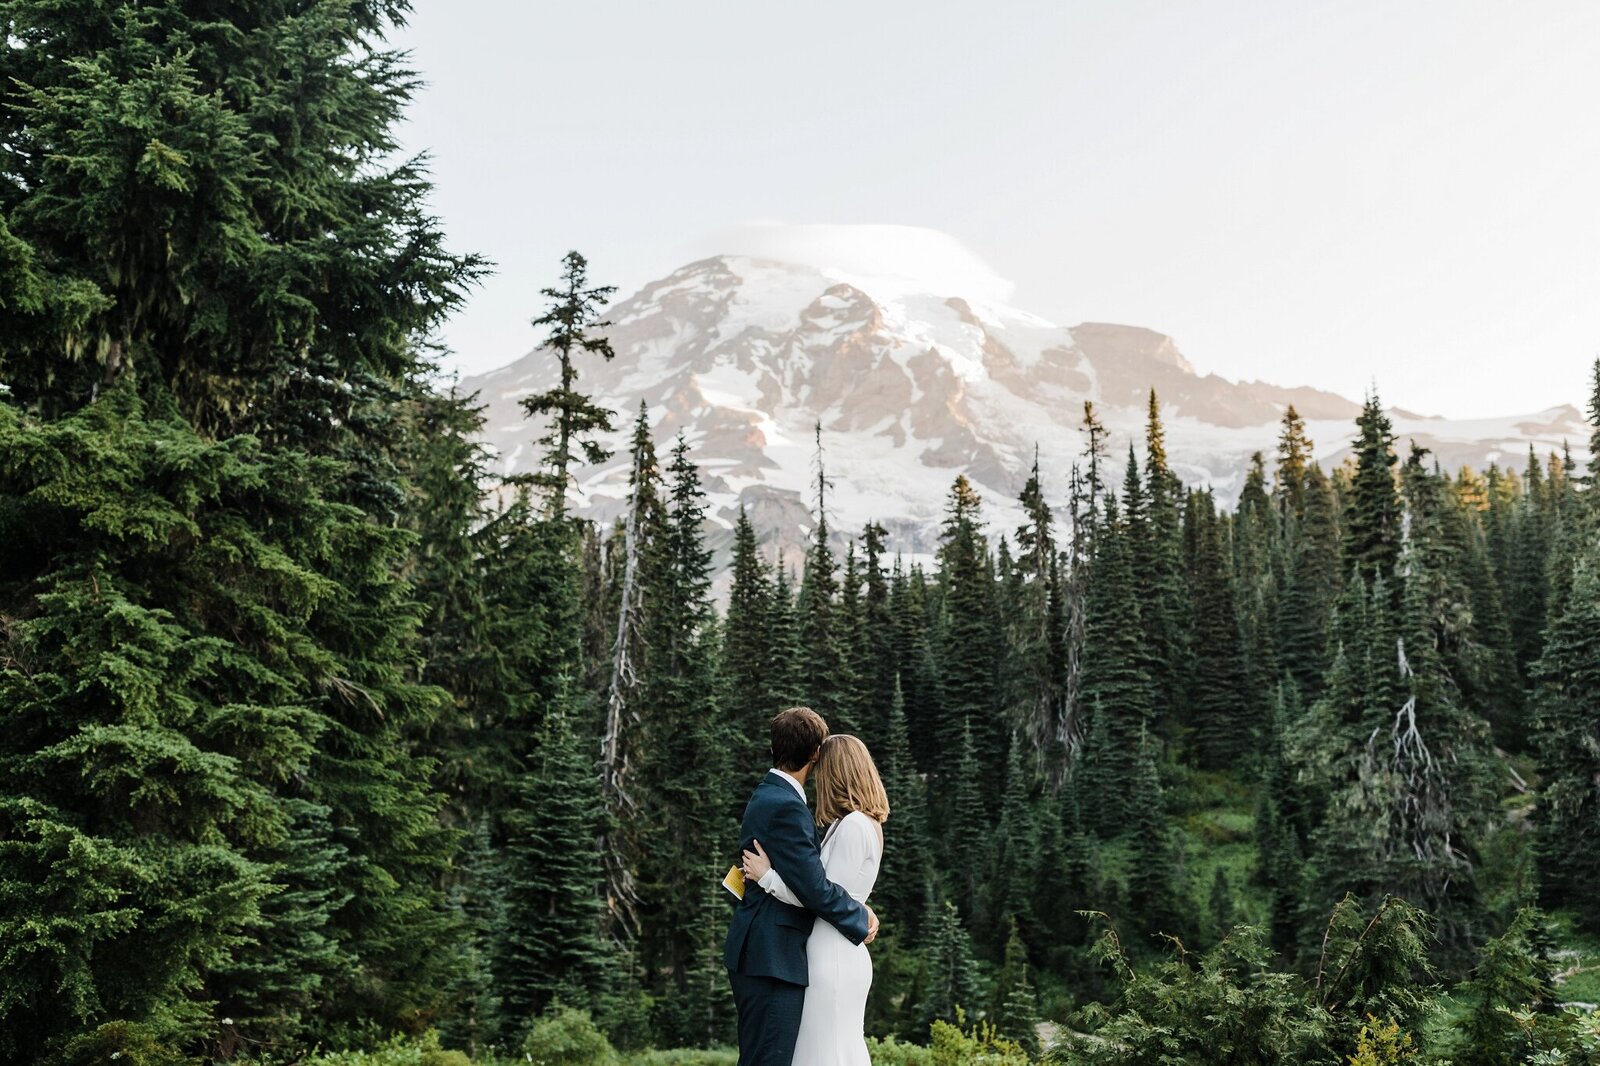 A bride and groom embrace after reading their vows during their sunrise elopement at Mt. Rainier National Park in Washington. | Erica Swantek Photography